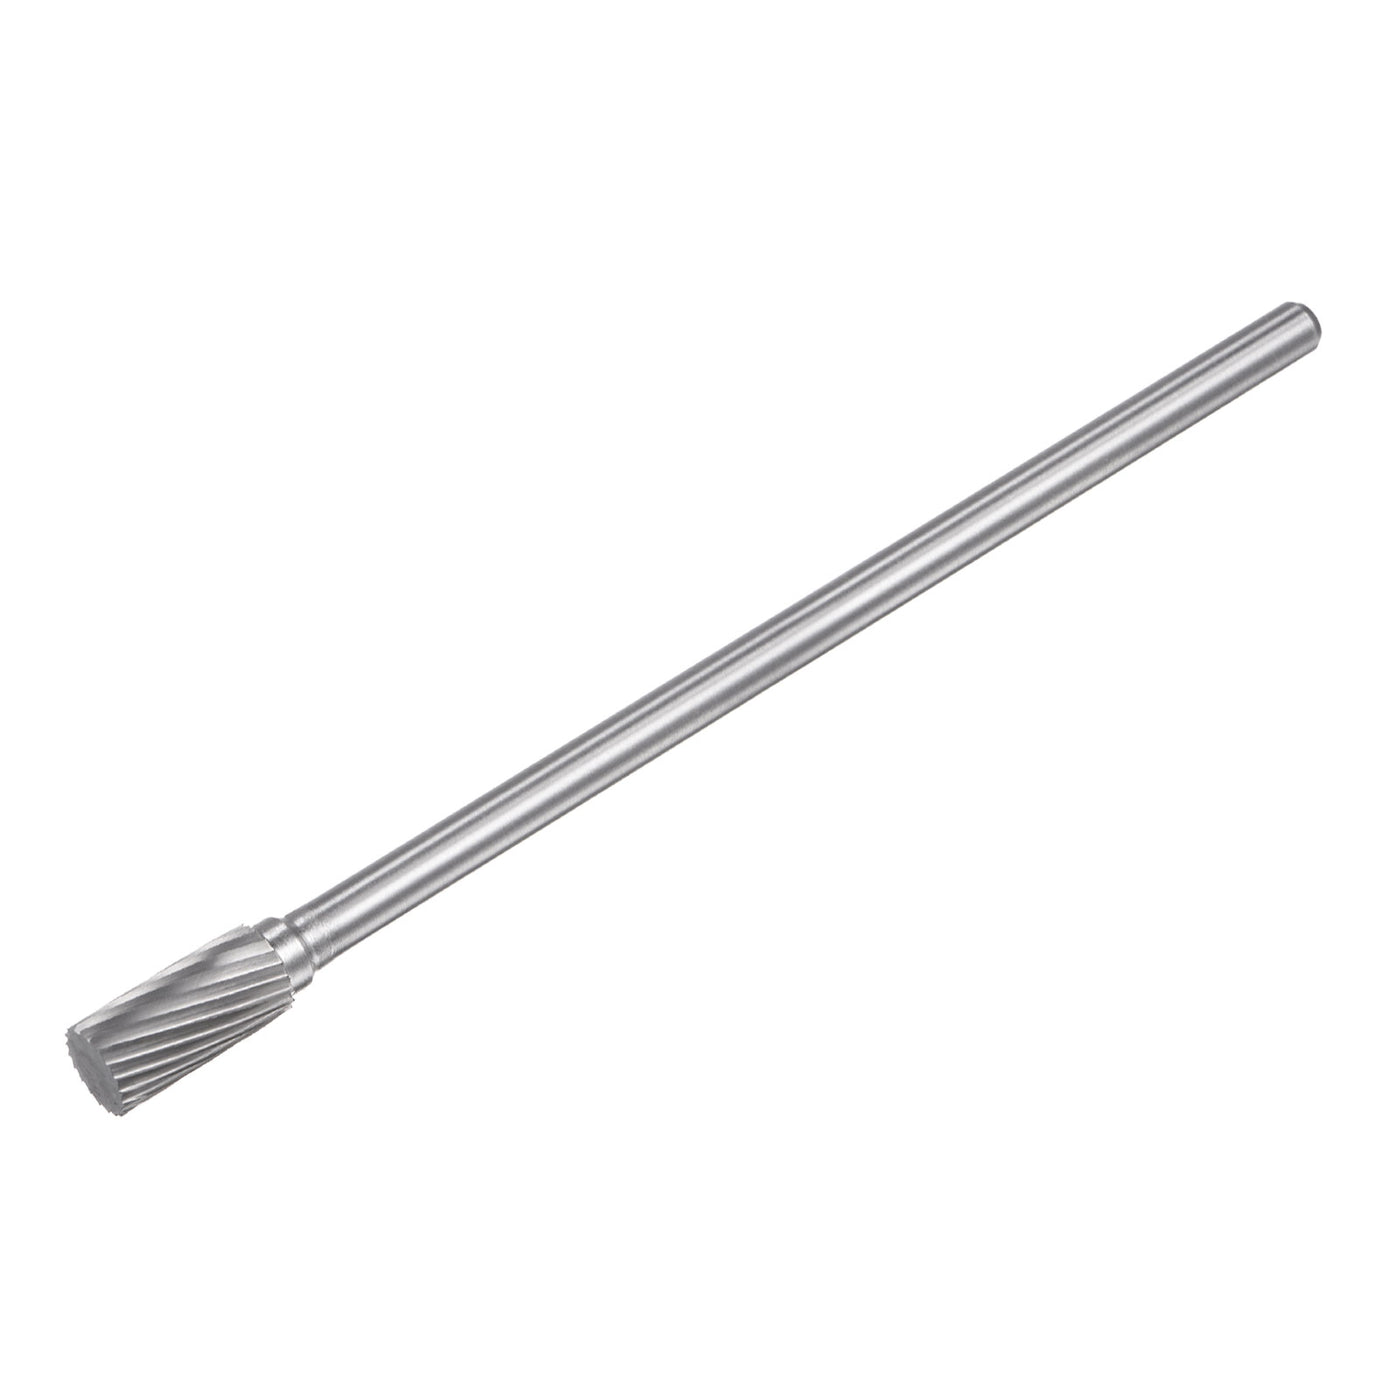 uxcell Uxcell 10mm x 150mm 6mm Shank Single Cut Cylinder Carbide Tip Rotary Files